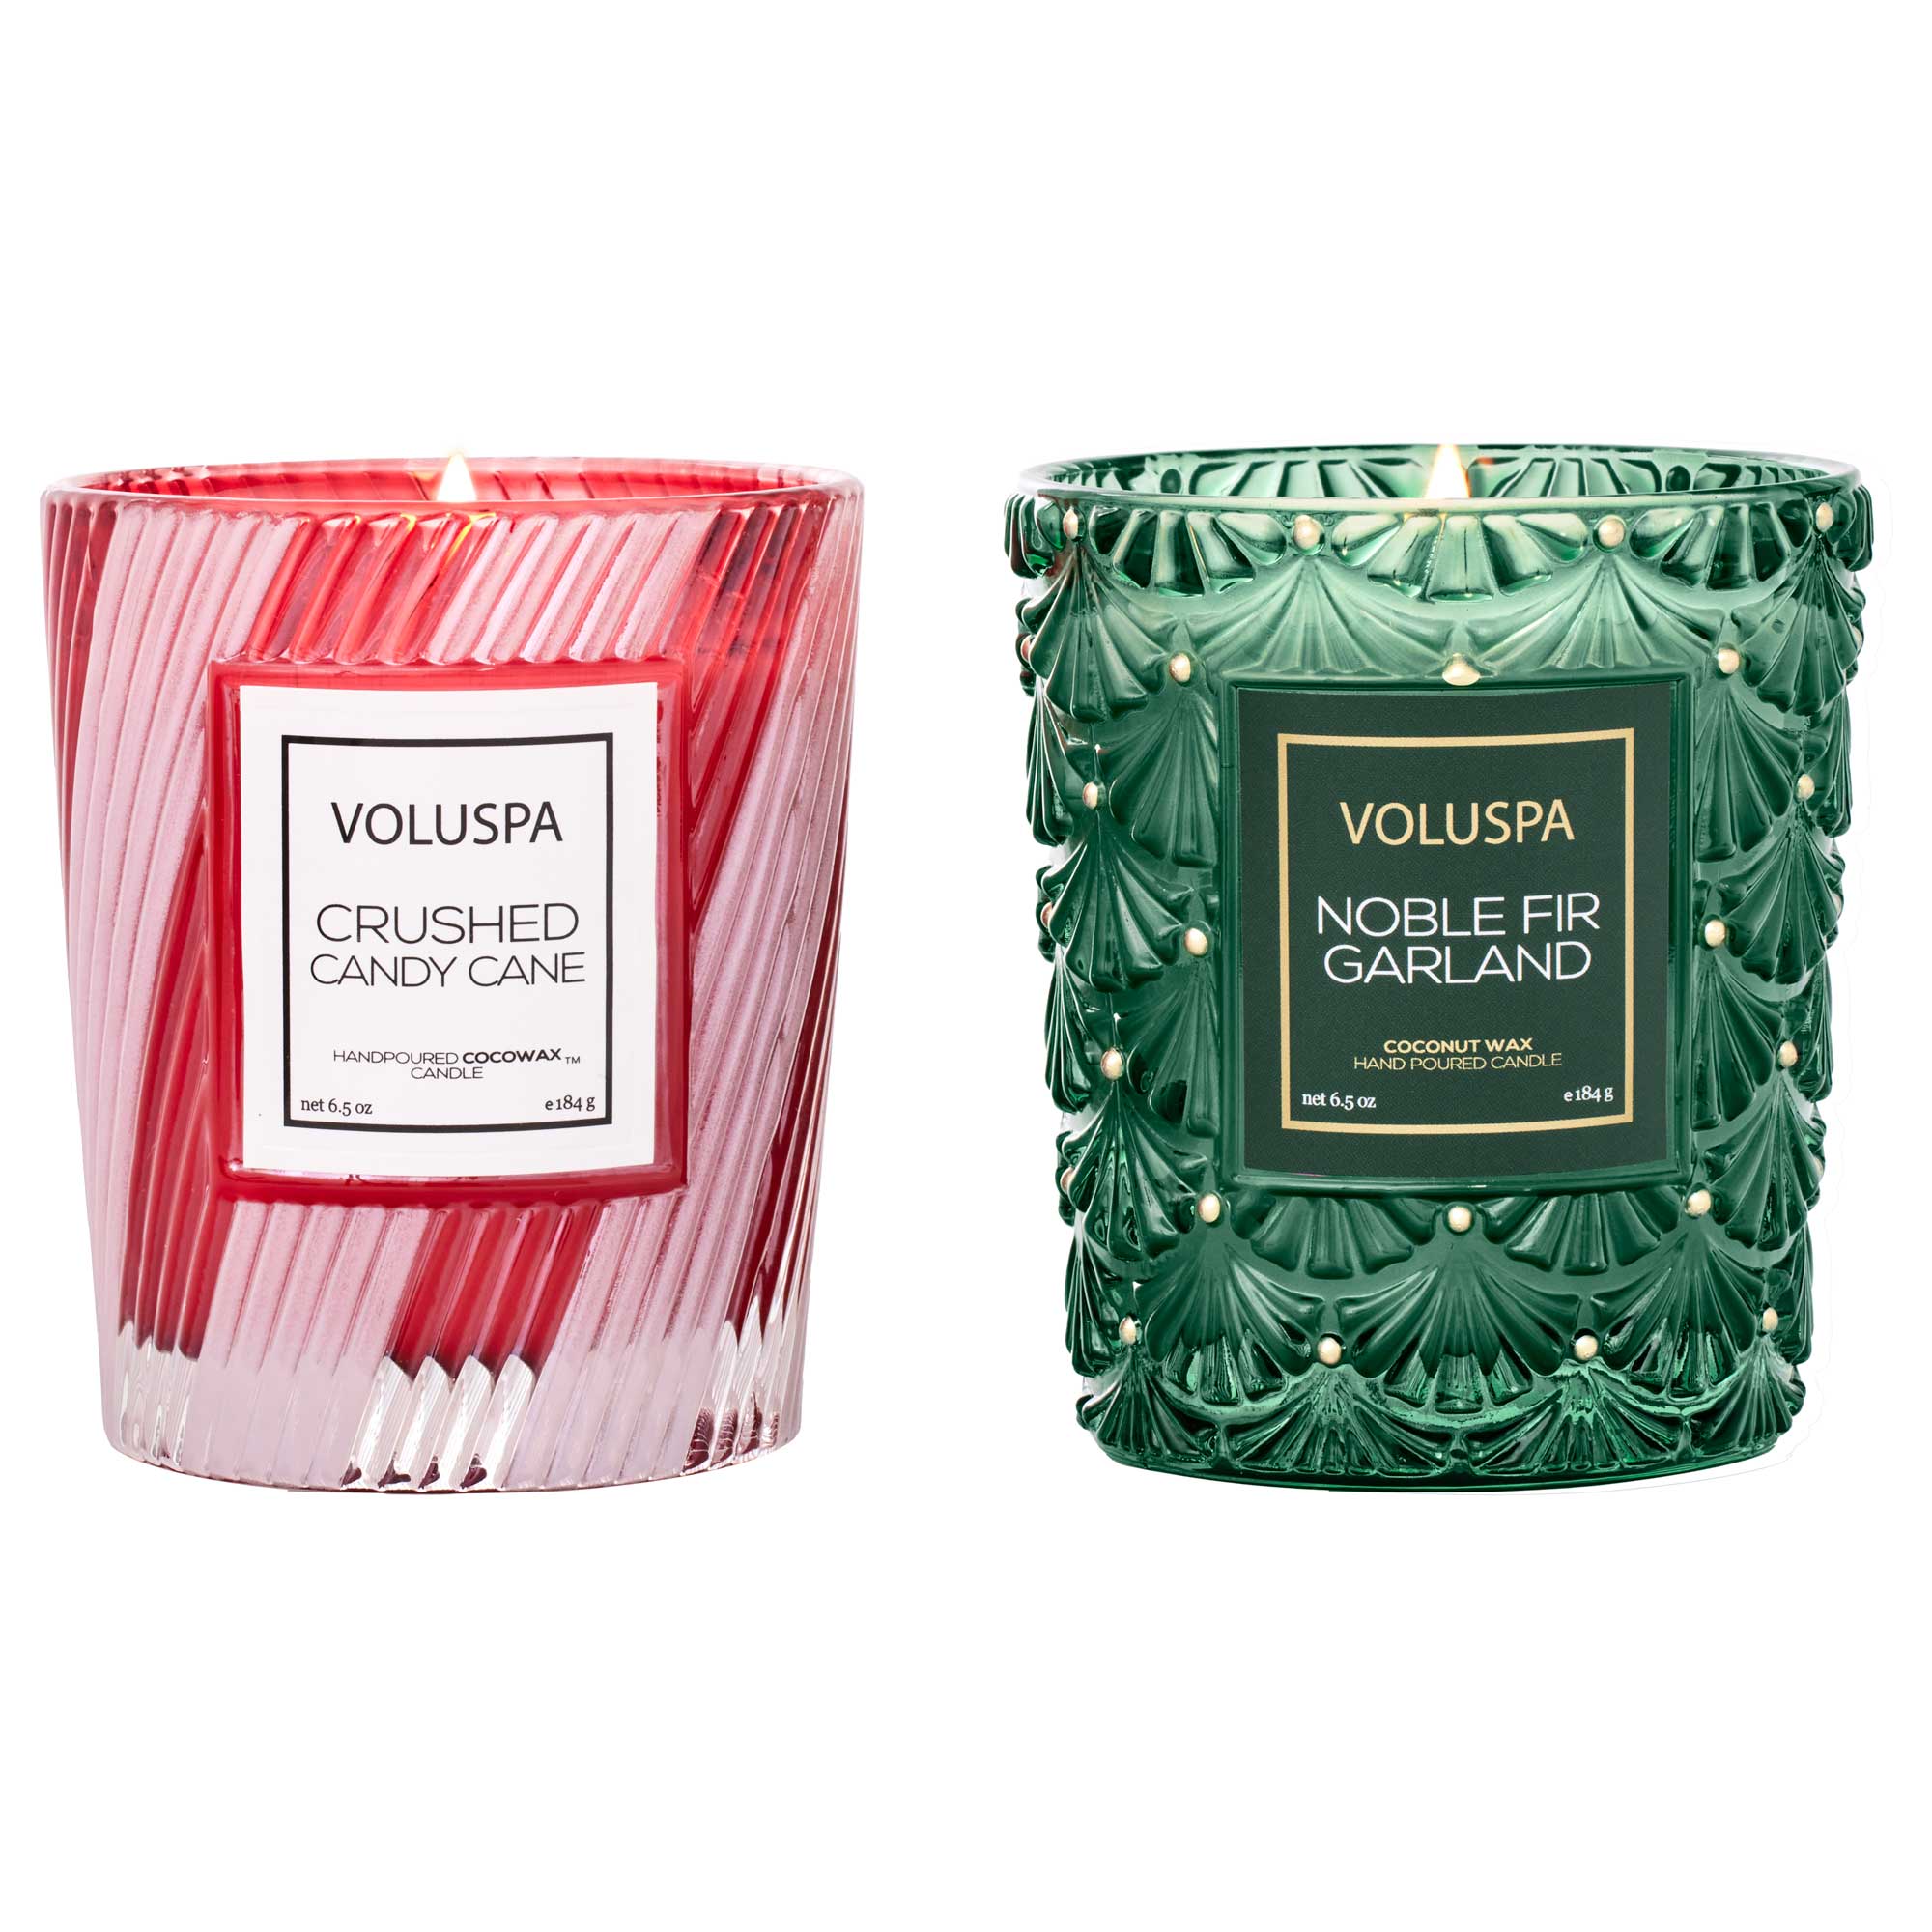 Light Up the Holidays - Candle Gift Set